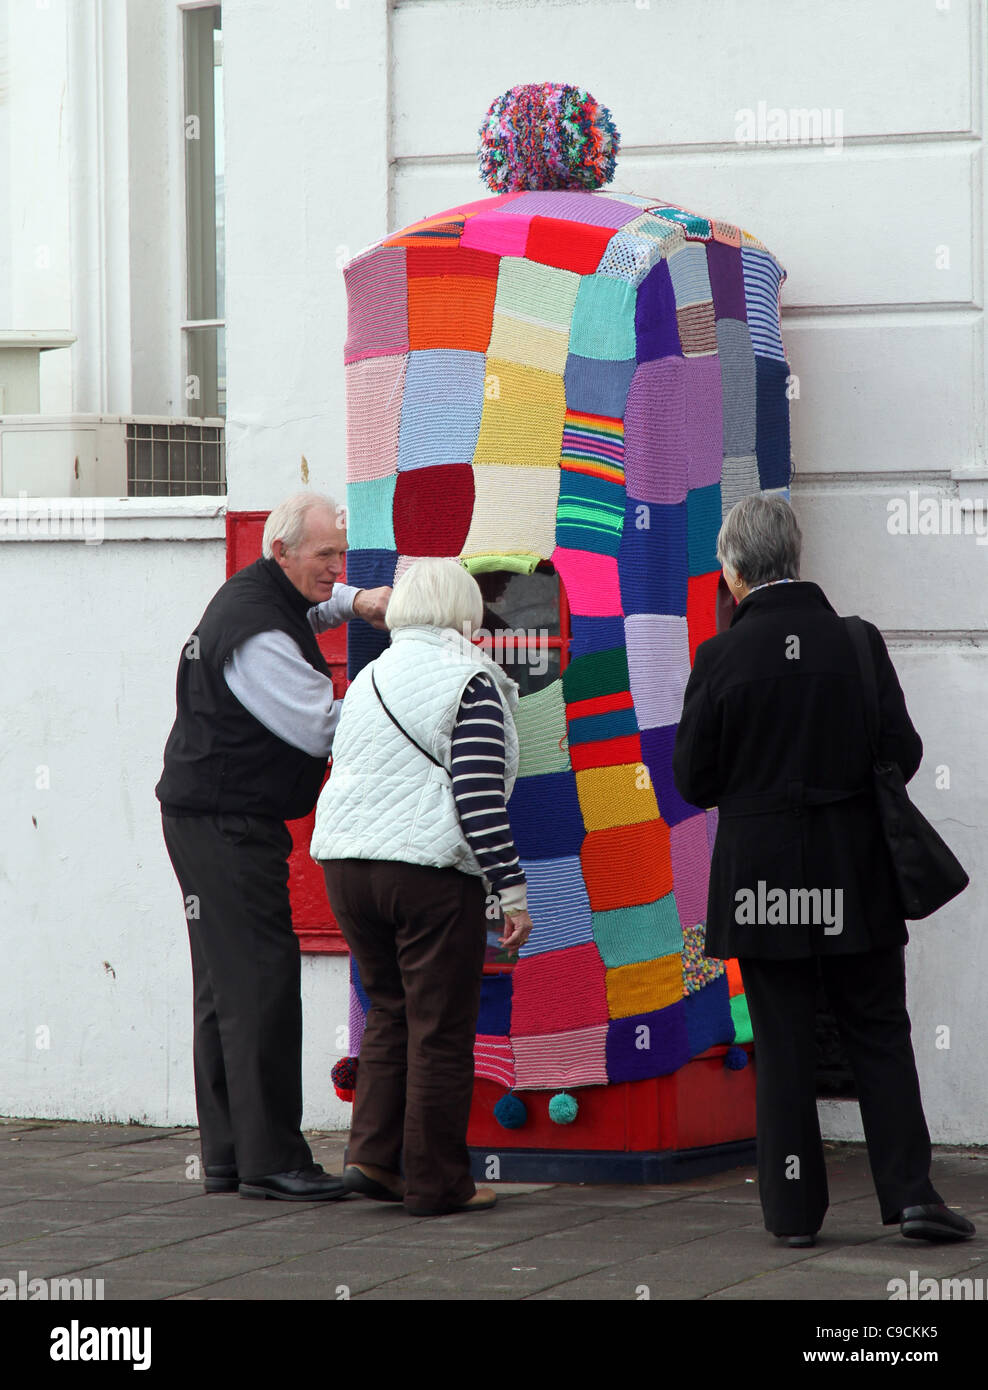 Three people looking at a red public telephone kiosk that had been covered over with knitting like a big tea cosy. Stock Photo